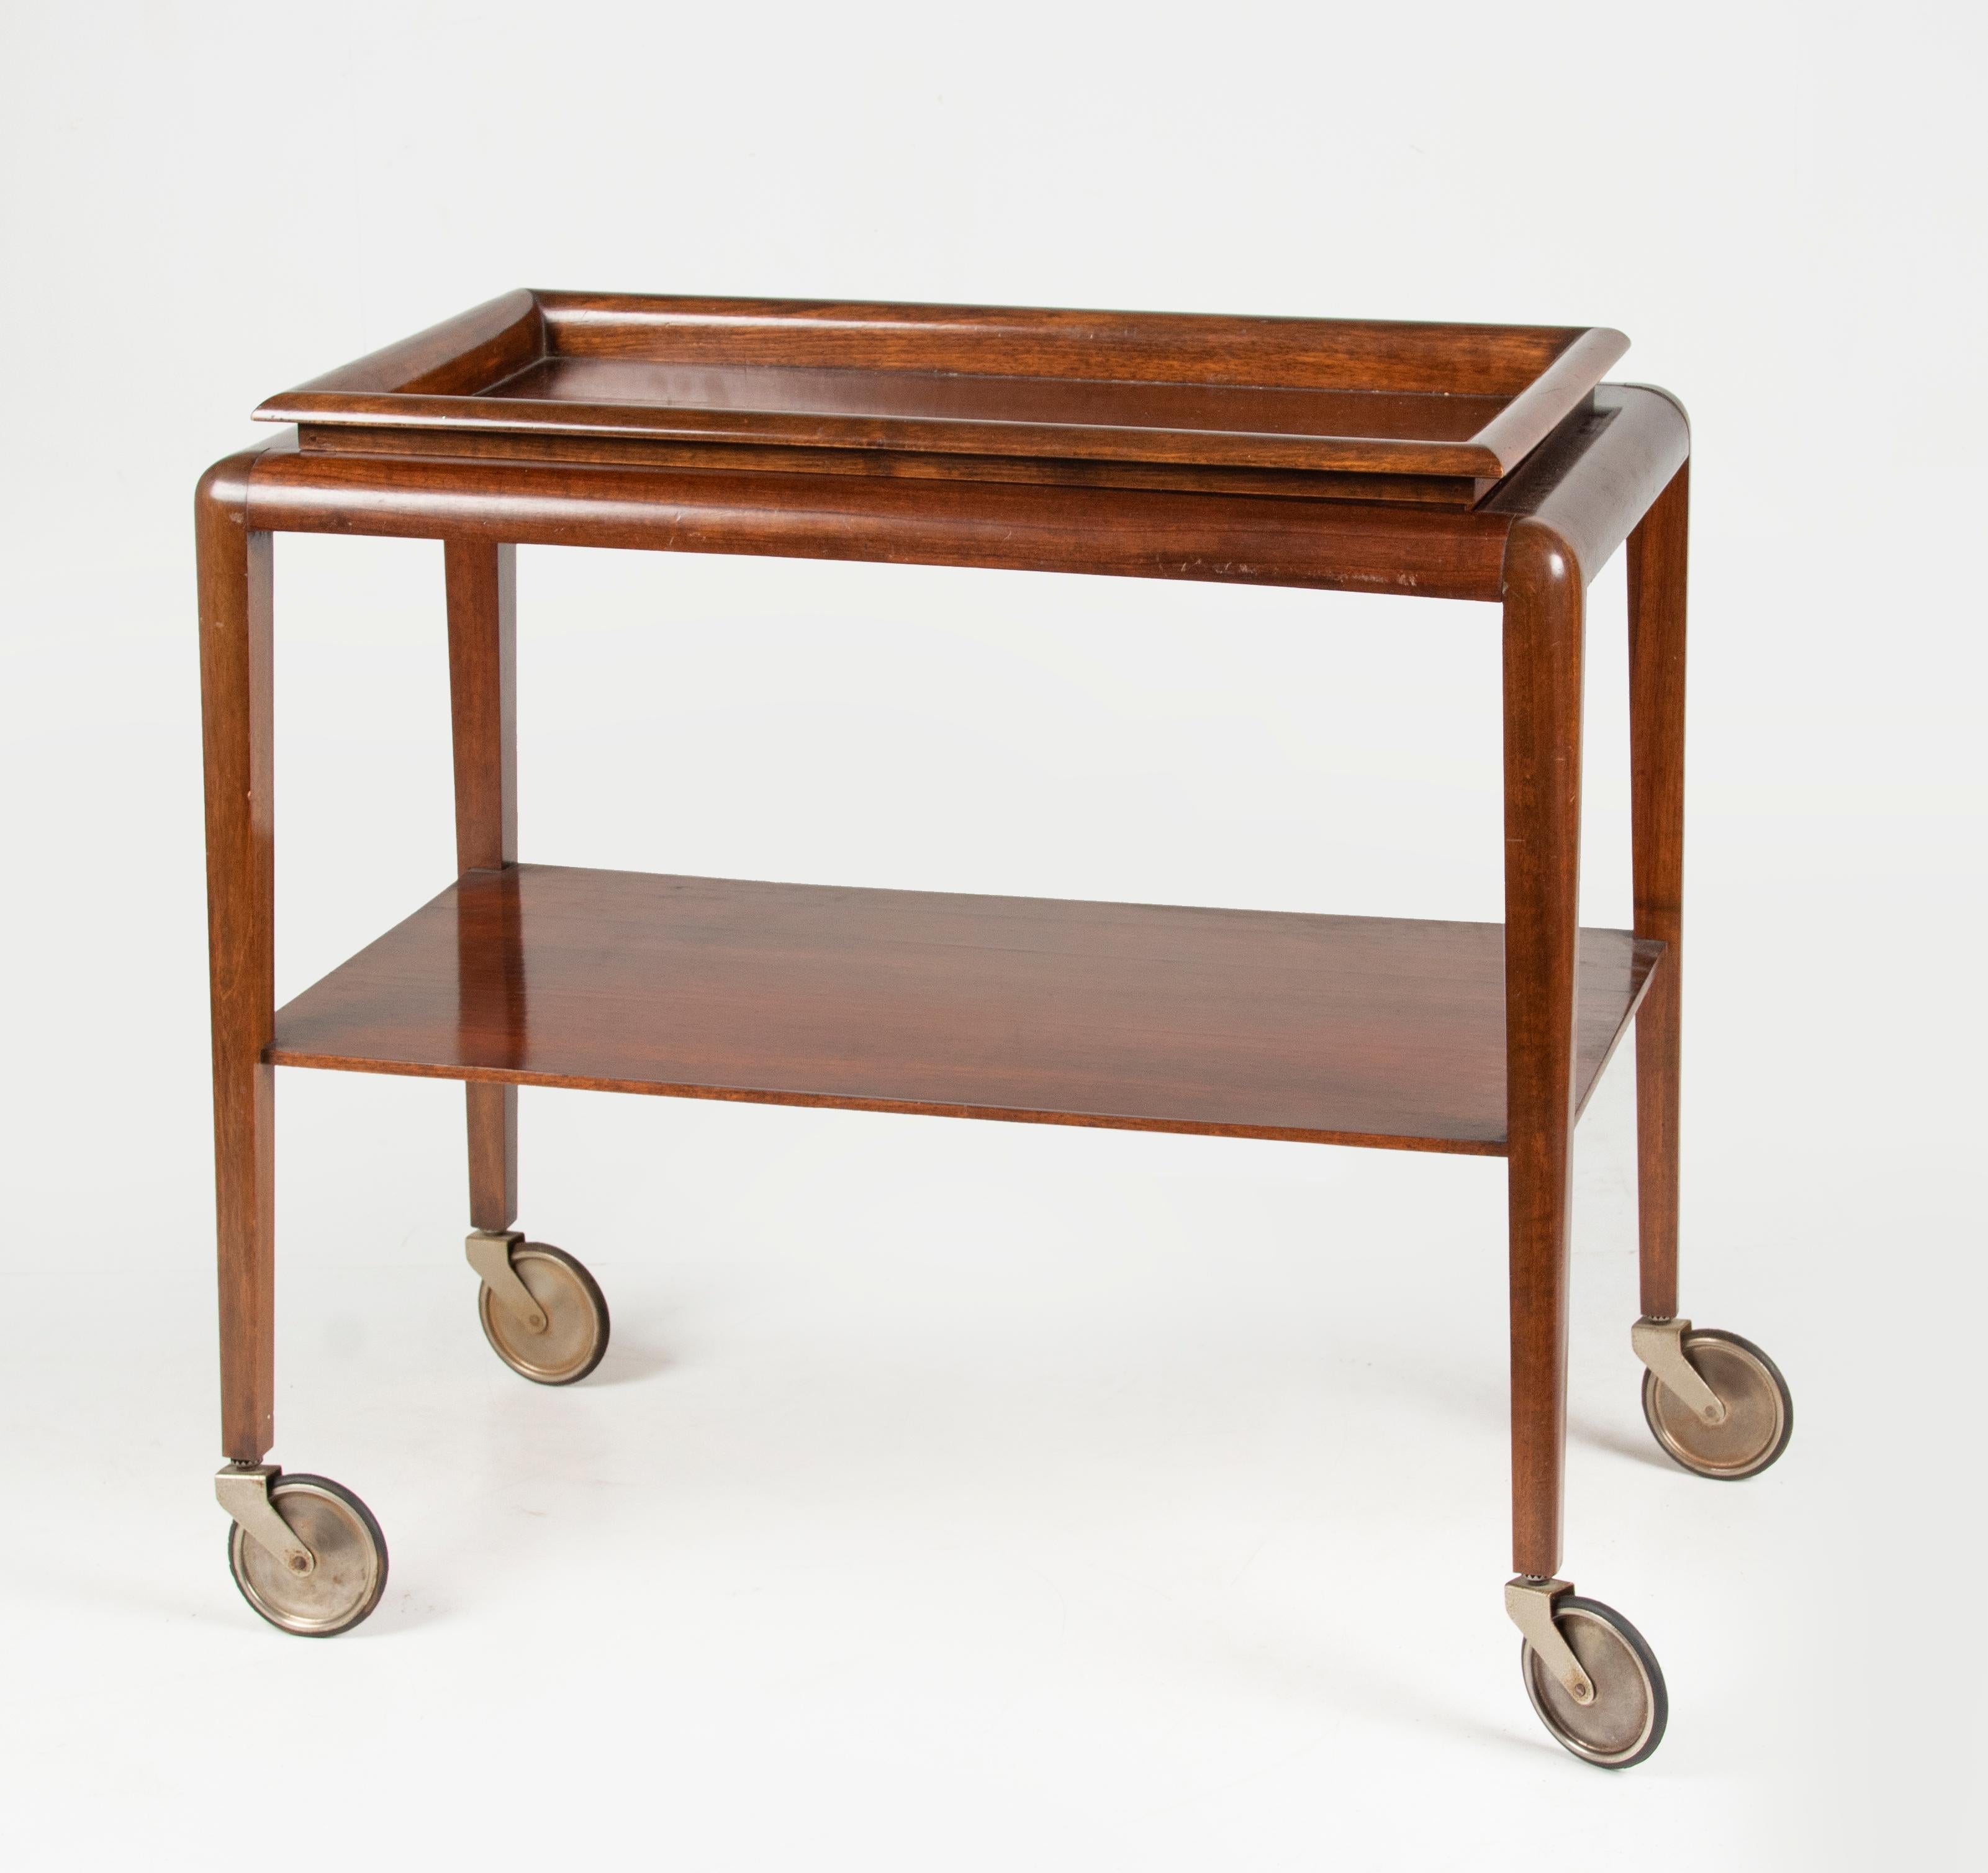 An elegant bar cart / trolley with a removable tray in Art Deco style. The trolley is made of beech wood. Tapered legs with iron swivel wheels. The tray has a glass top. Made in France, circa 1950-1960.